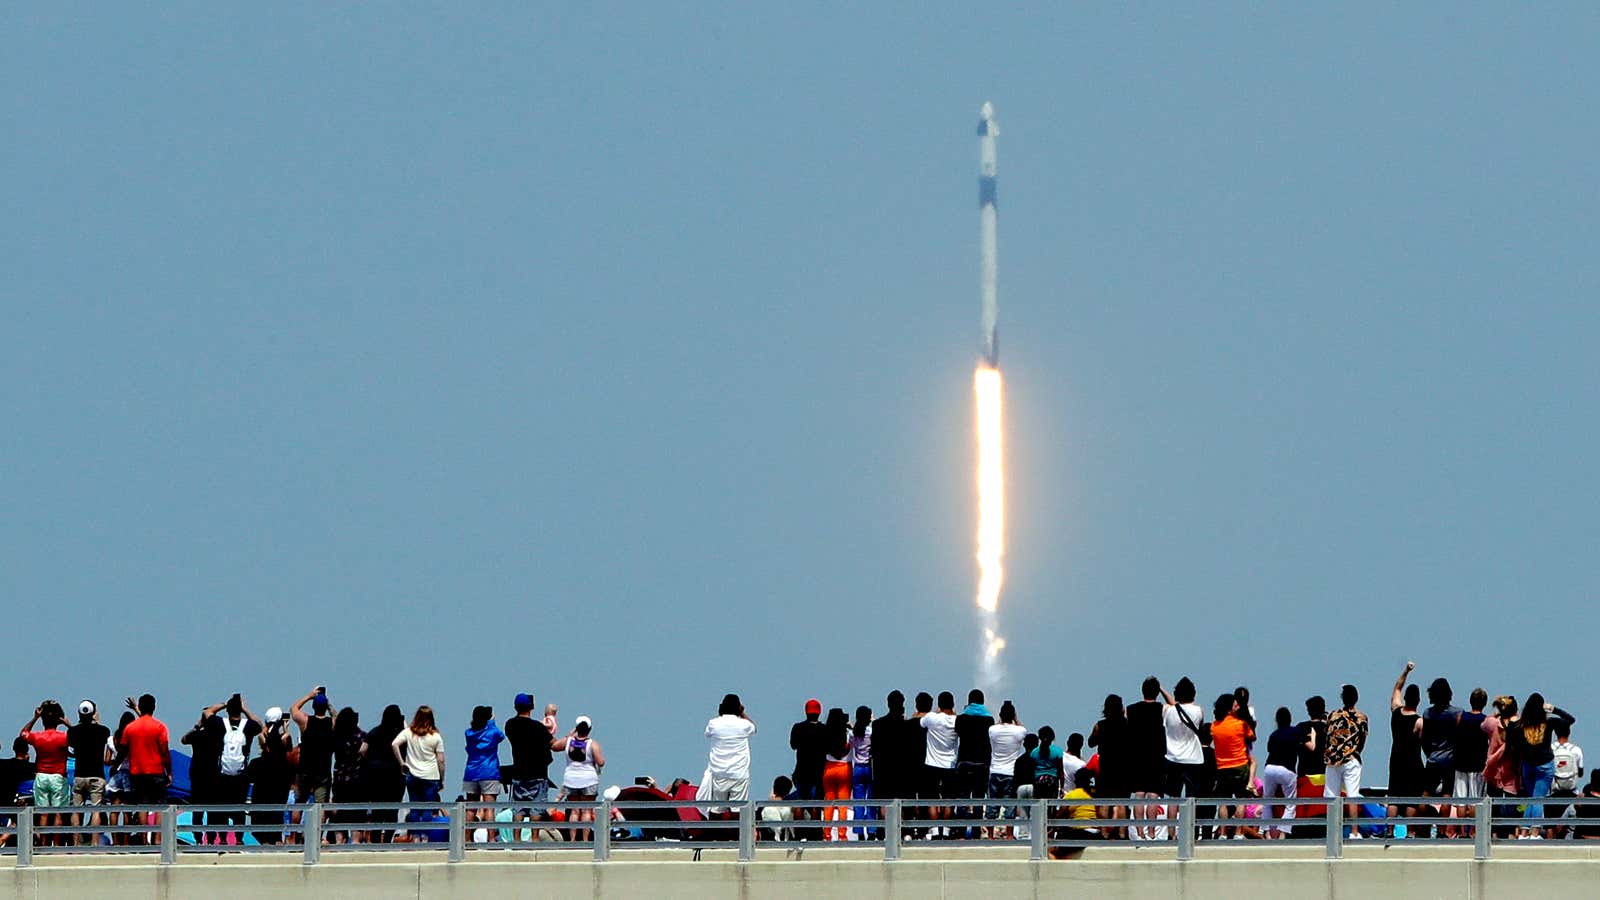 The return of human spaceflight to the US came amidst protests against racism.